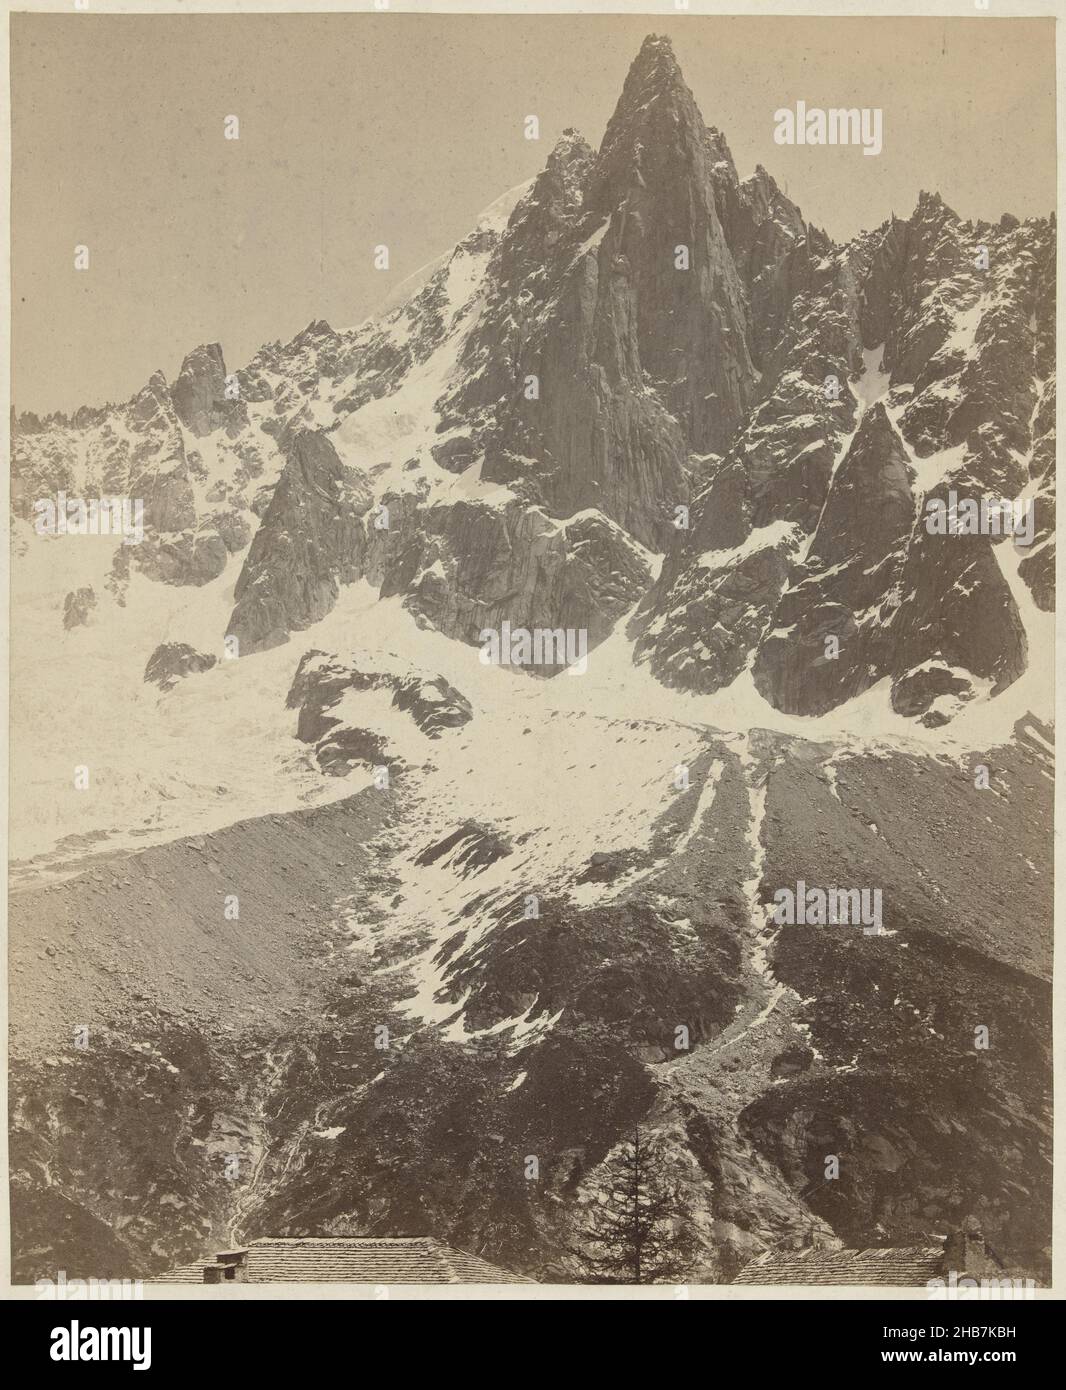 View of the Aiguille du Midi in the Mont Blanc Massif, Chaine du Montblanc Montanourd et Aiguille de Rue (title on object), Adolphe Braun & Cie. (mentioned on object), Mont Blanc Massief, 1860 - 1866, paper, cardboard, albumen print, height 323 mm × width 264 mmheight 422 mm × width 310 mm Stock Photo